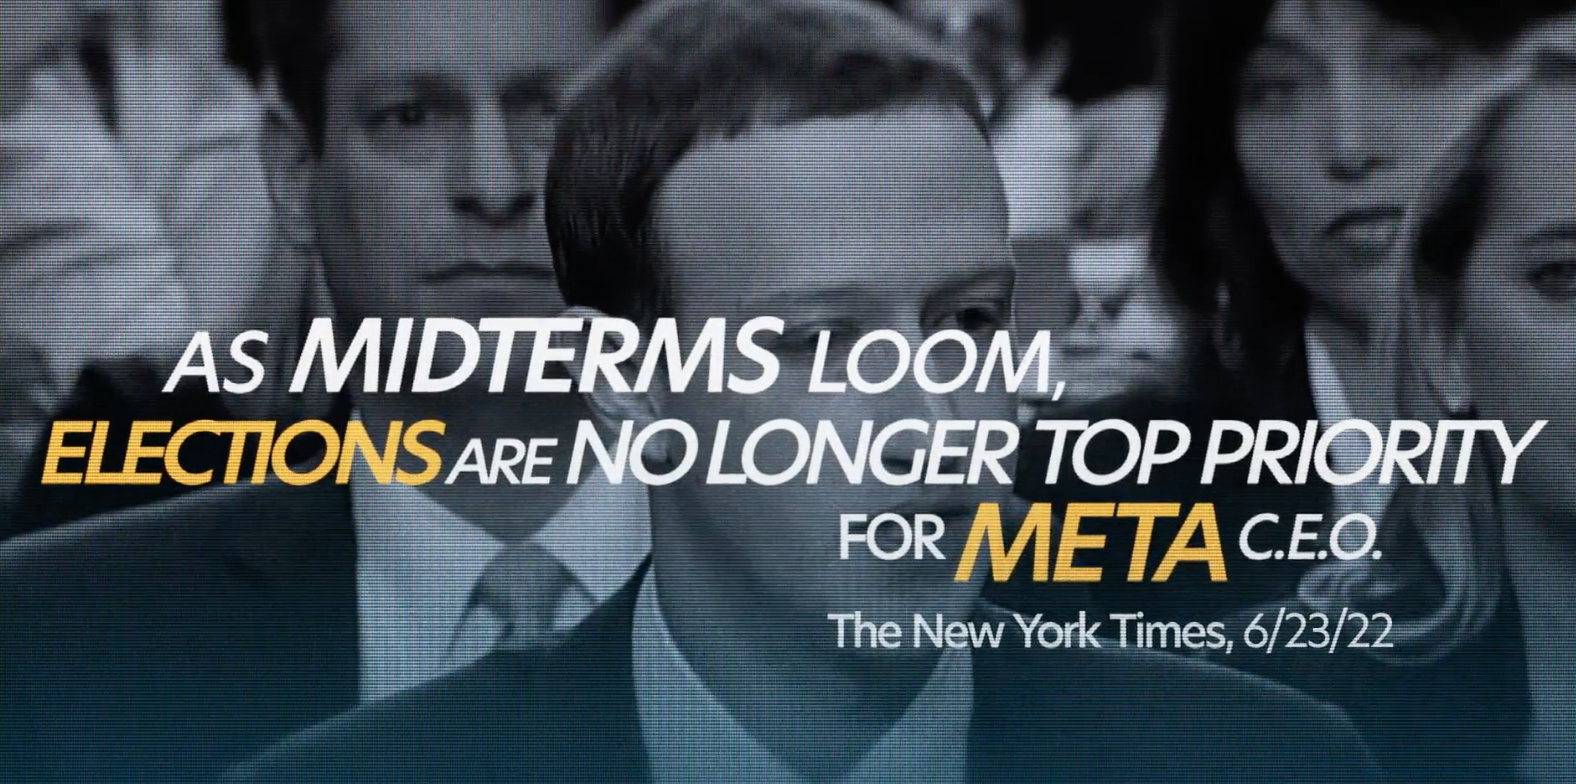 Screenshot of the television ad showing a New York Times headline from 6/23/22 saying "As Midterms Loom, Elections are no Longer Top Priority for Meta C.E.O."